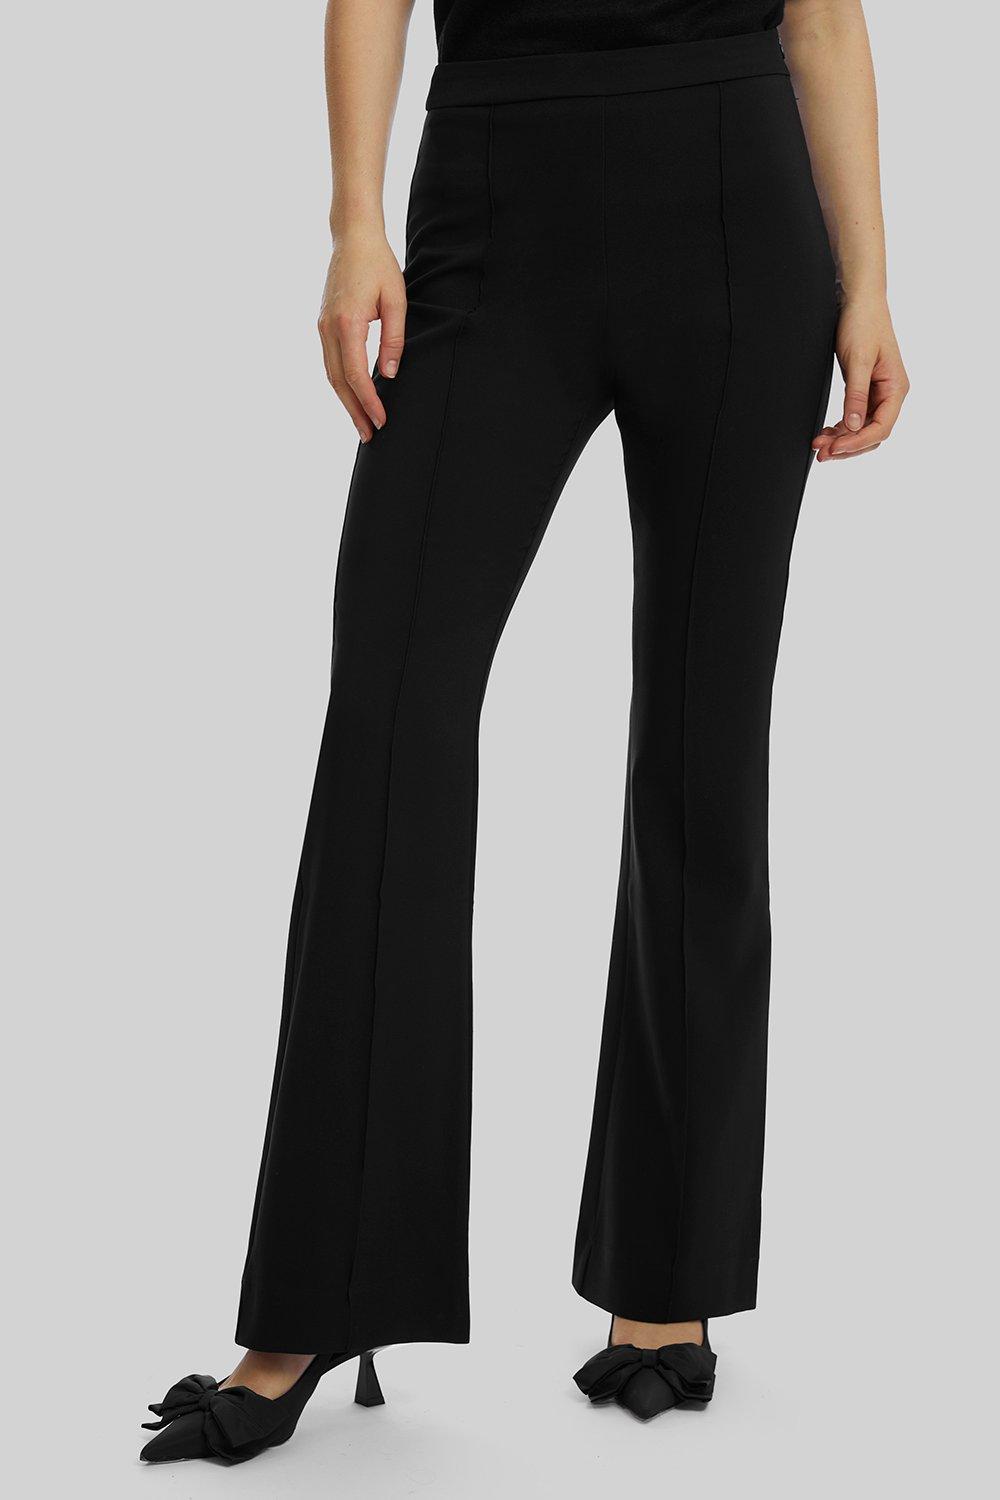 Buy Black Tailored Elastic Back Bootcut Trousers from Next USA